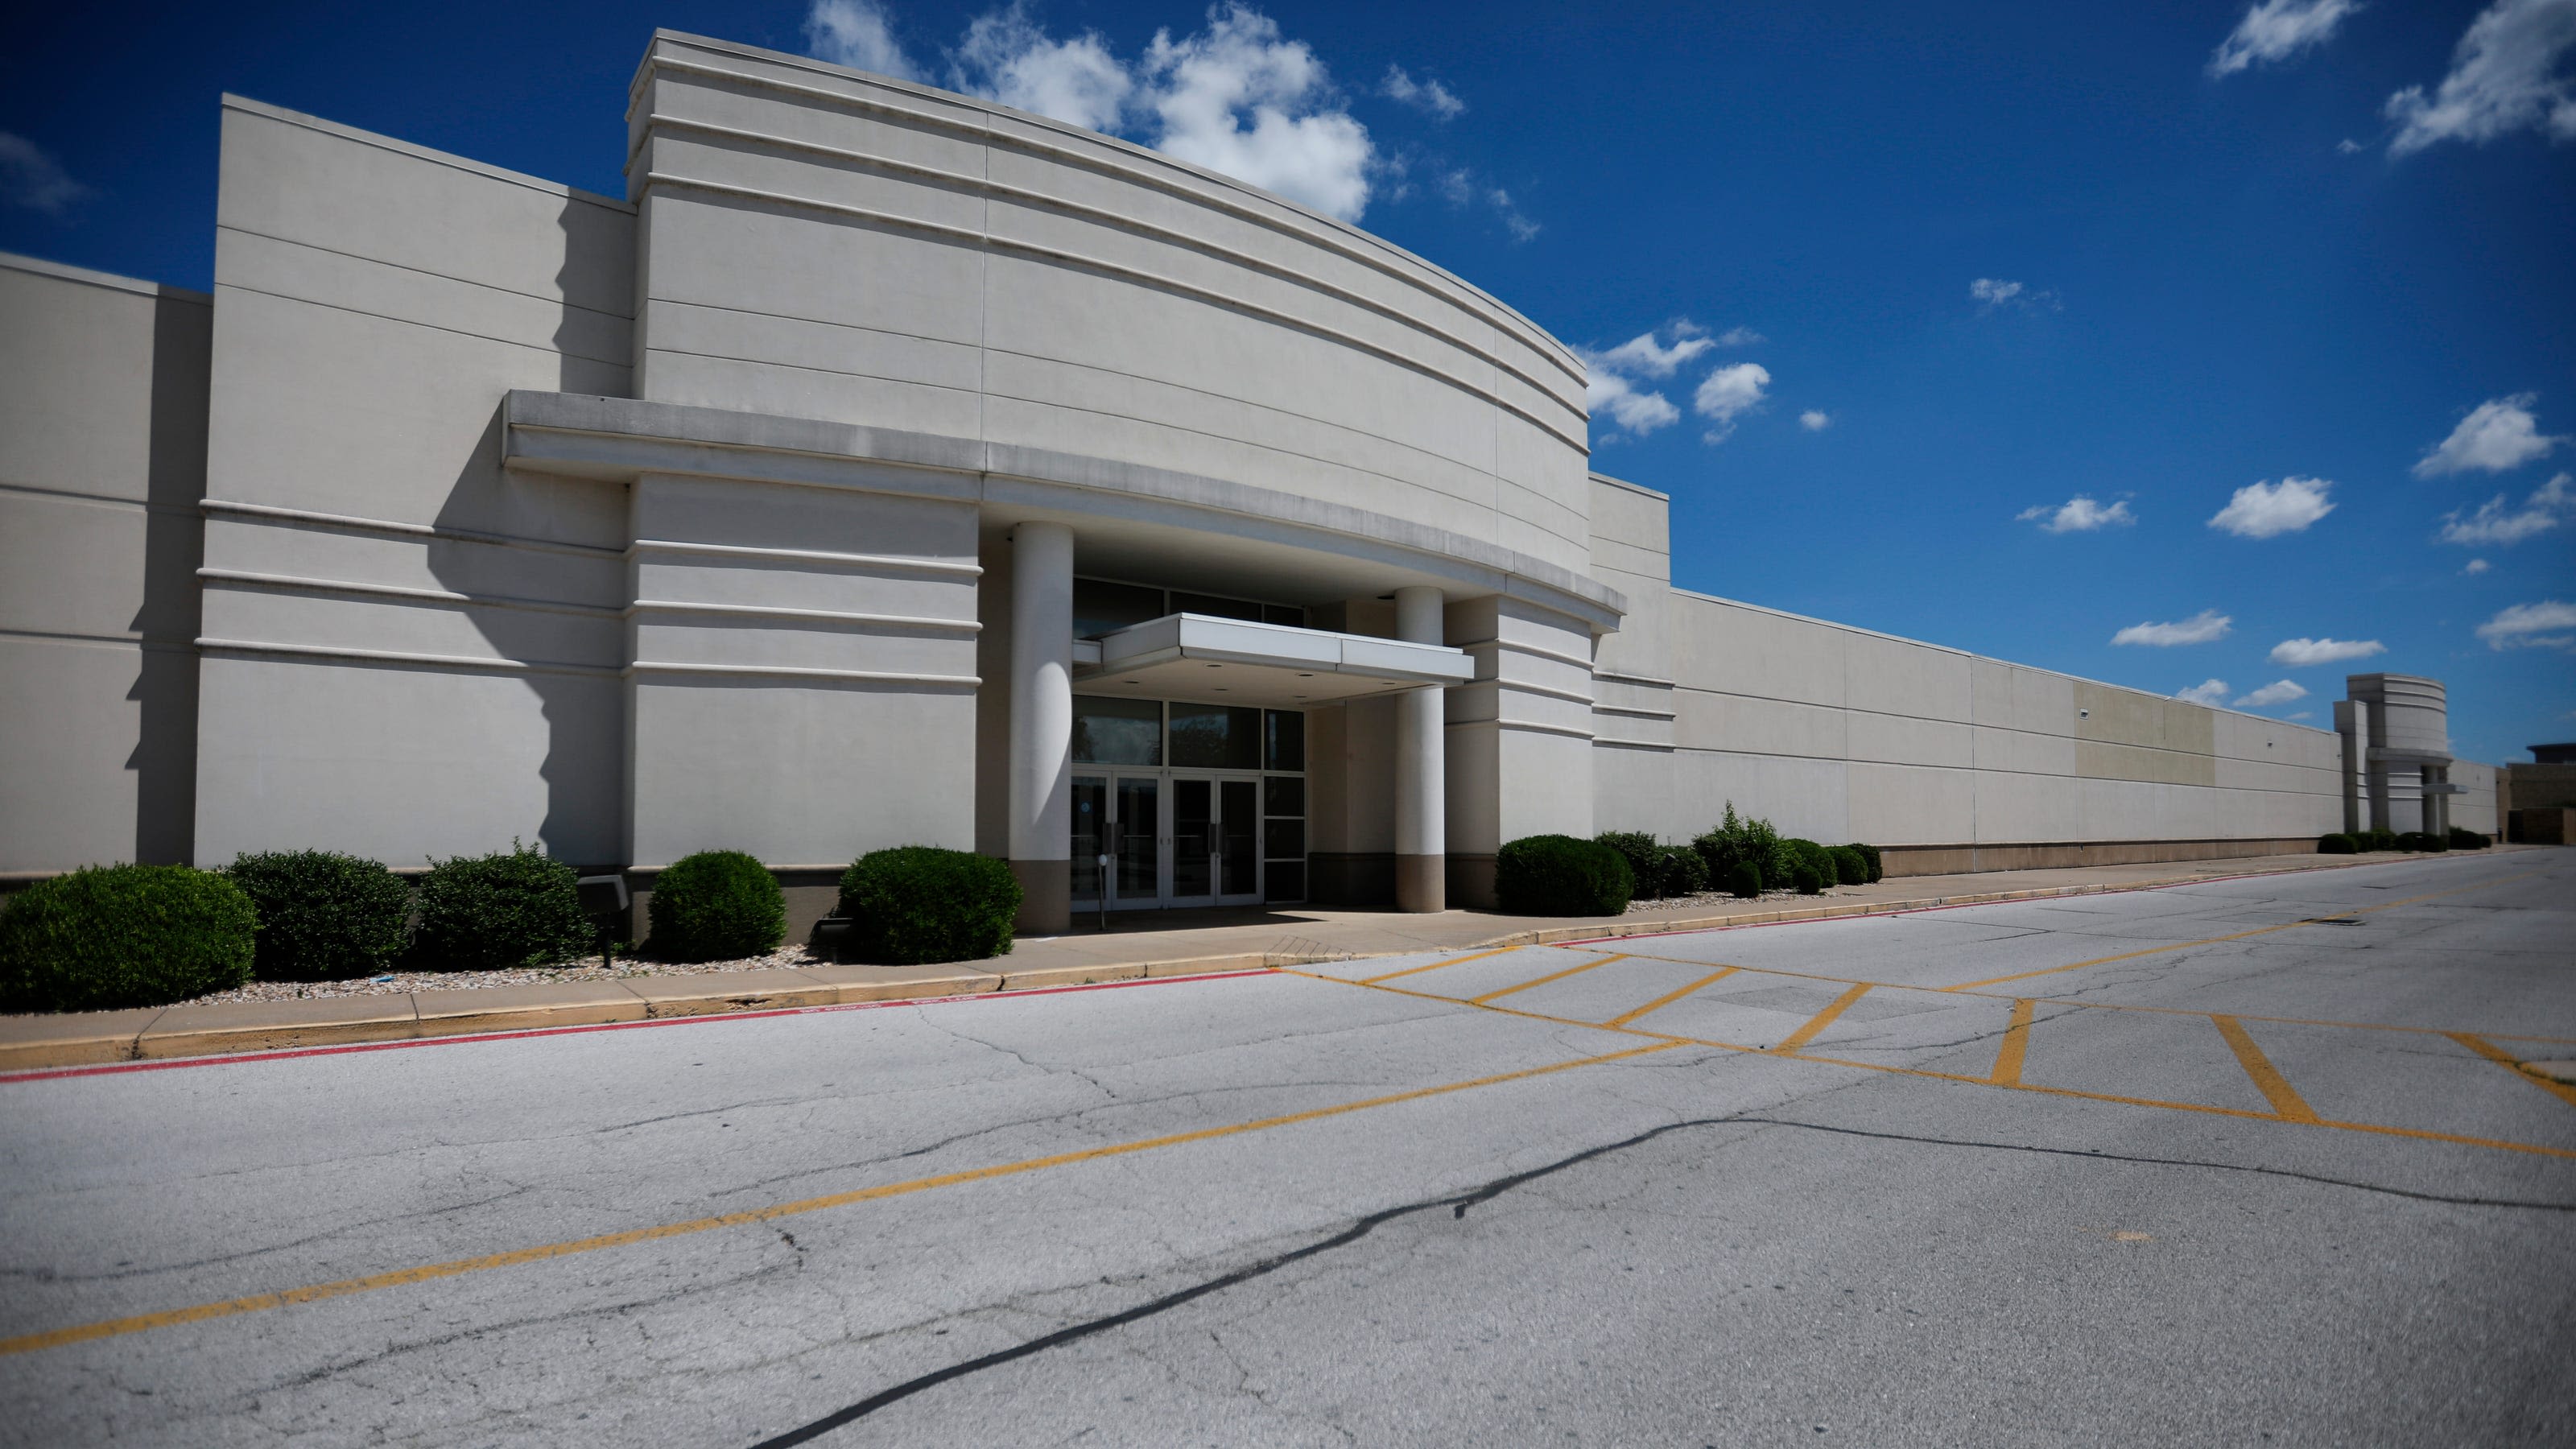 Here's what could be next for Battlefield Mall's long-vacant Sears store